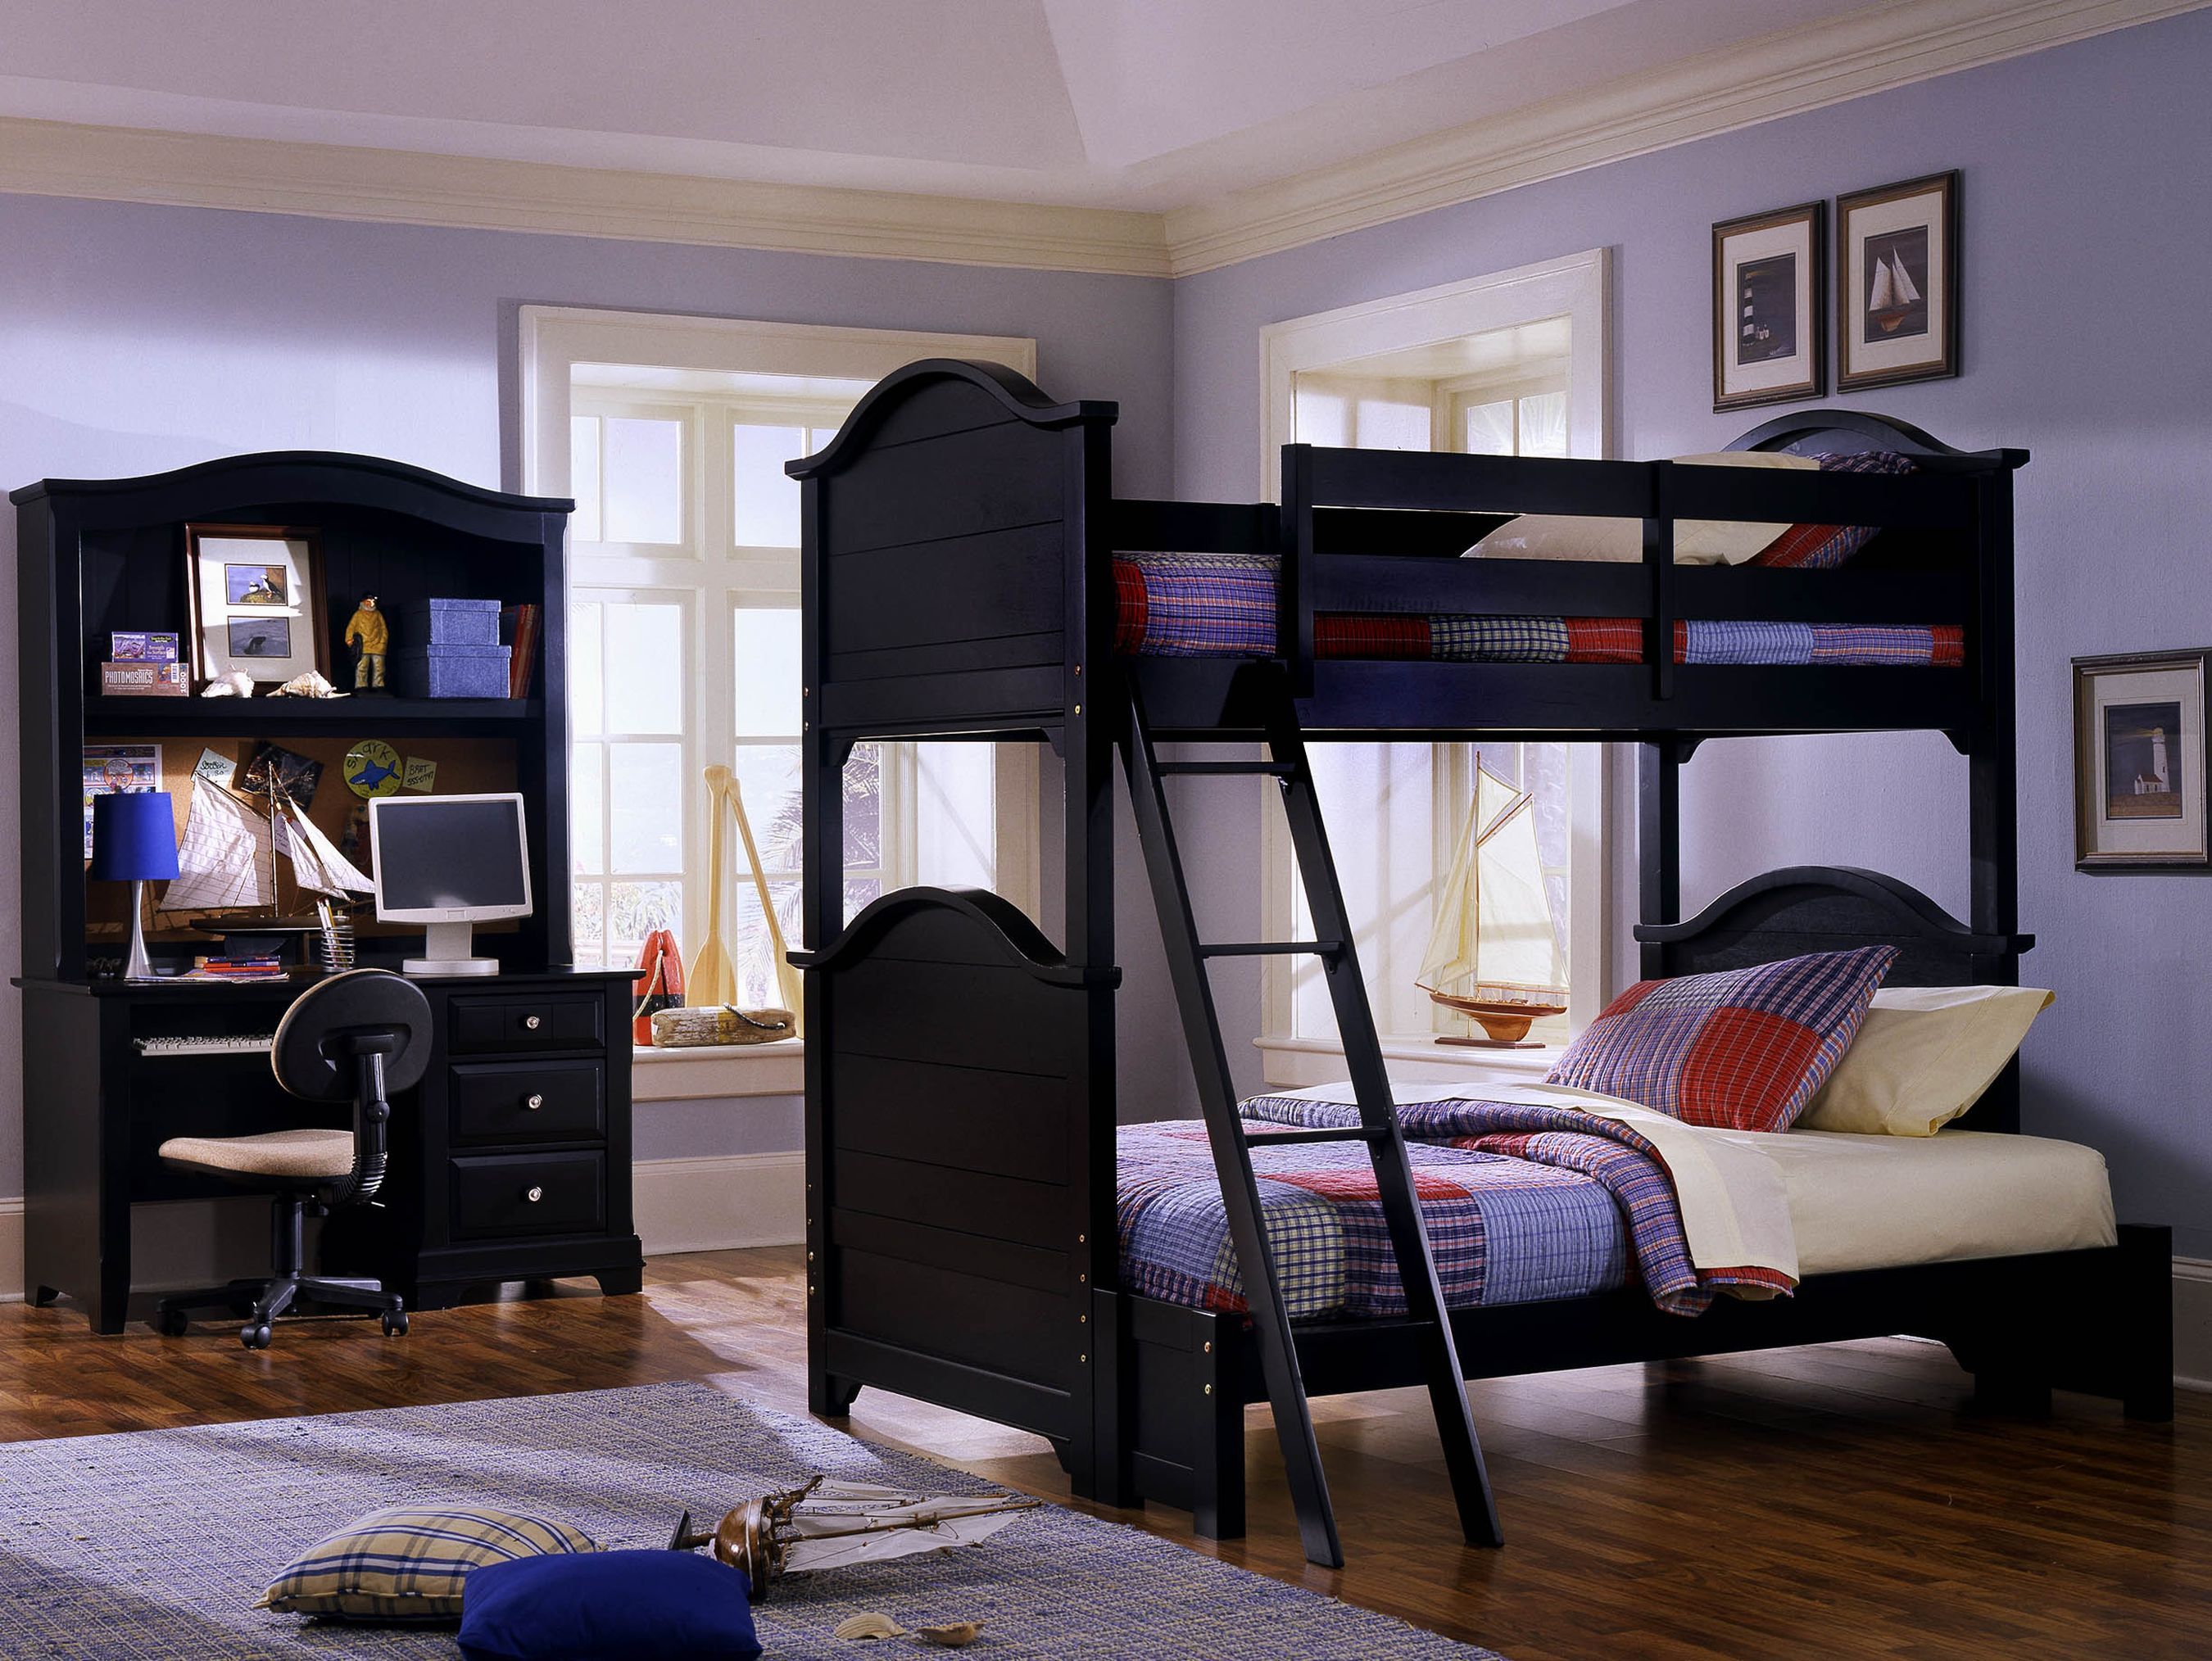 Vaughan Bassett The Cottage Collection 4 Piece Bedroom Set   Bunk Bed